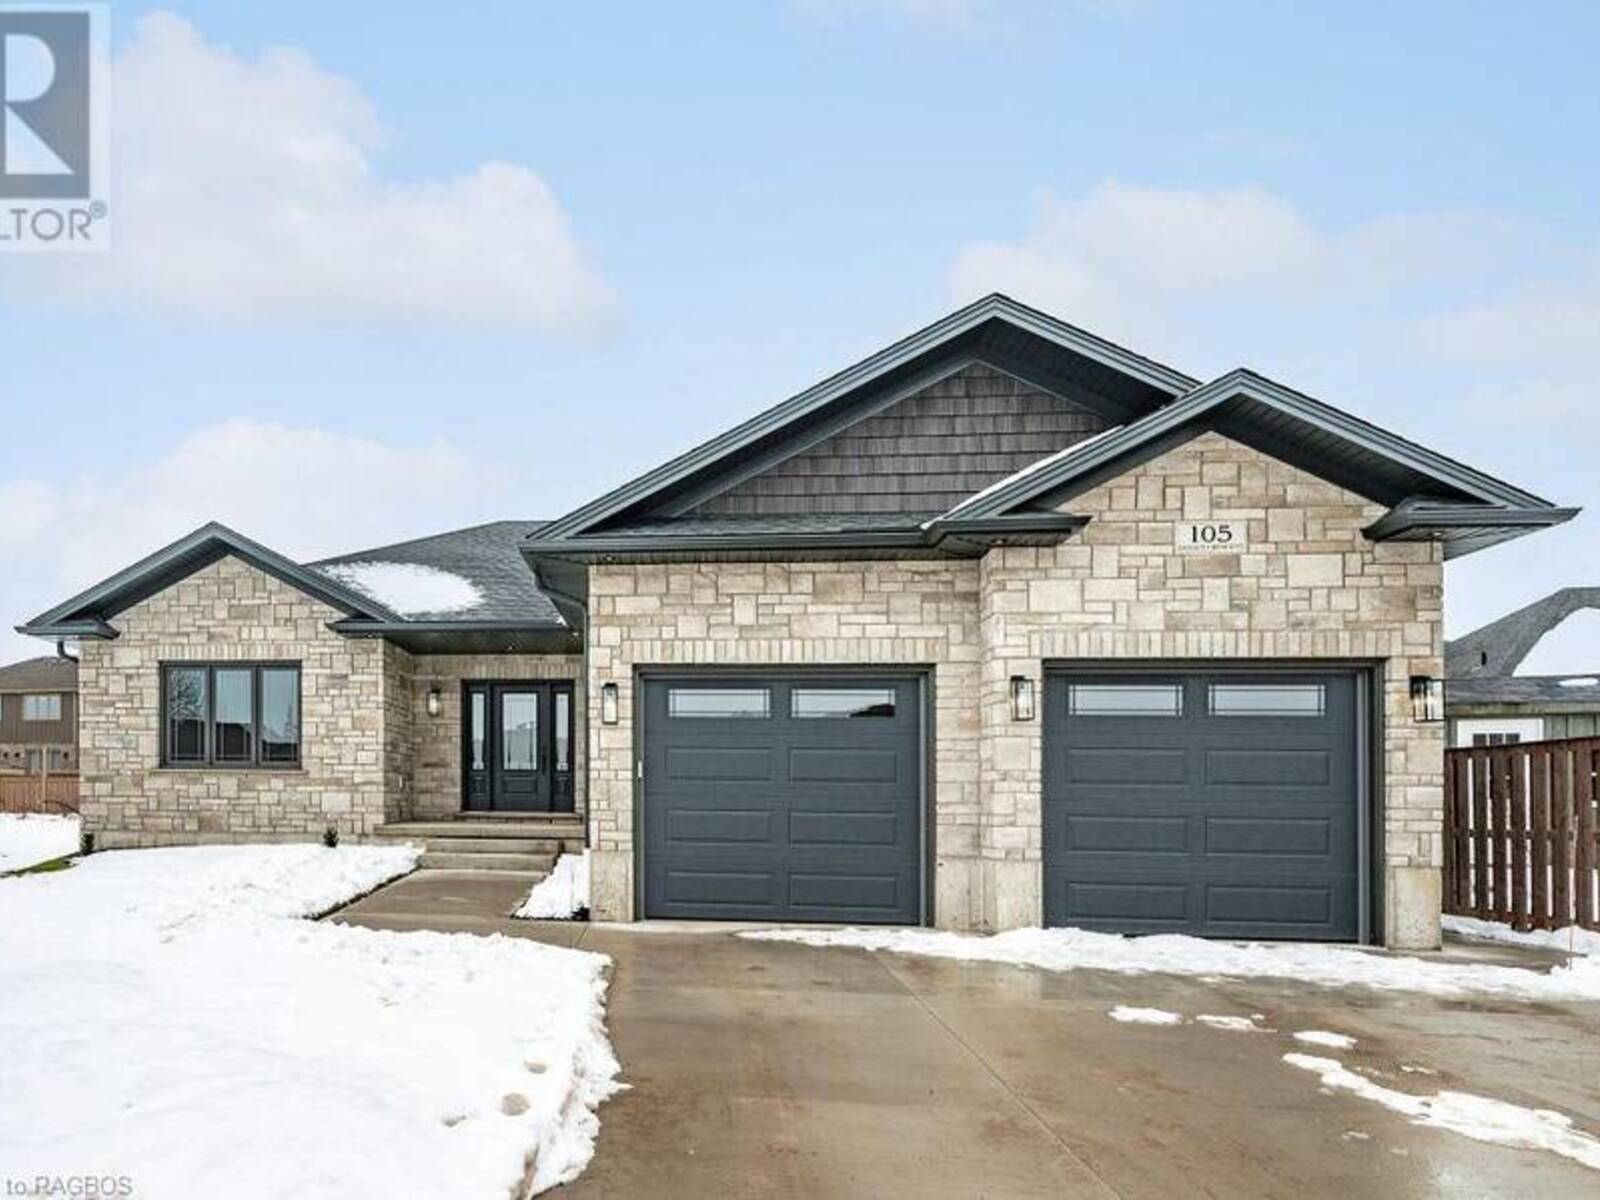 105 DOUGS Crescent, Mount Forest, Ontario N0G 2L2